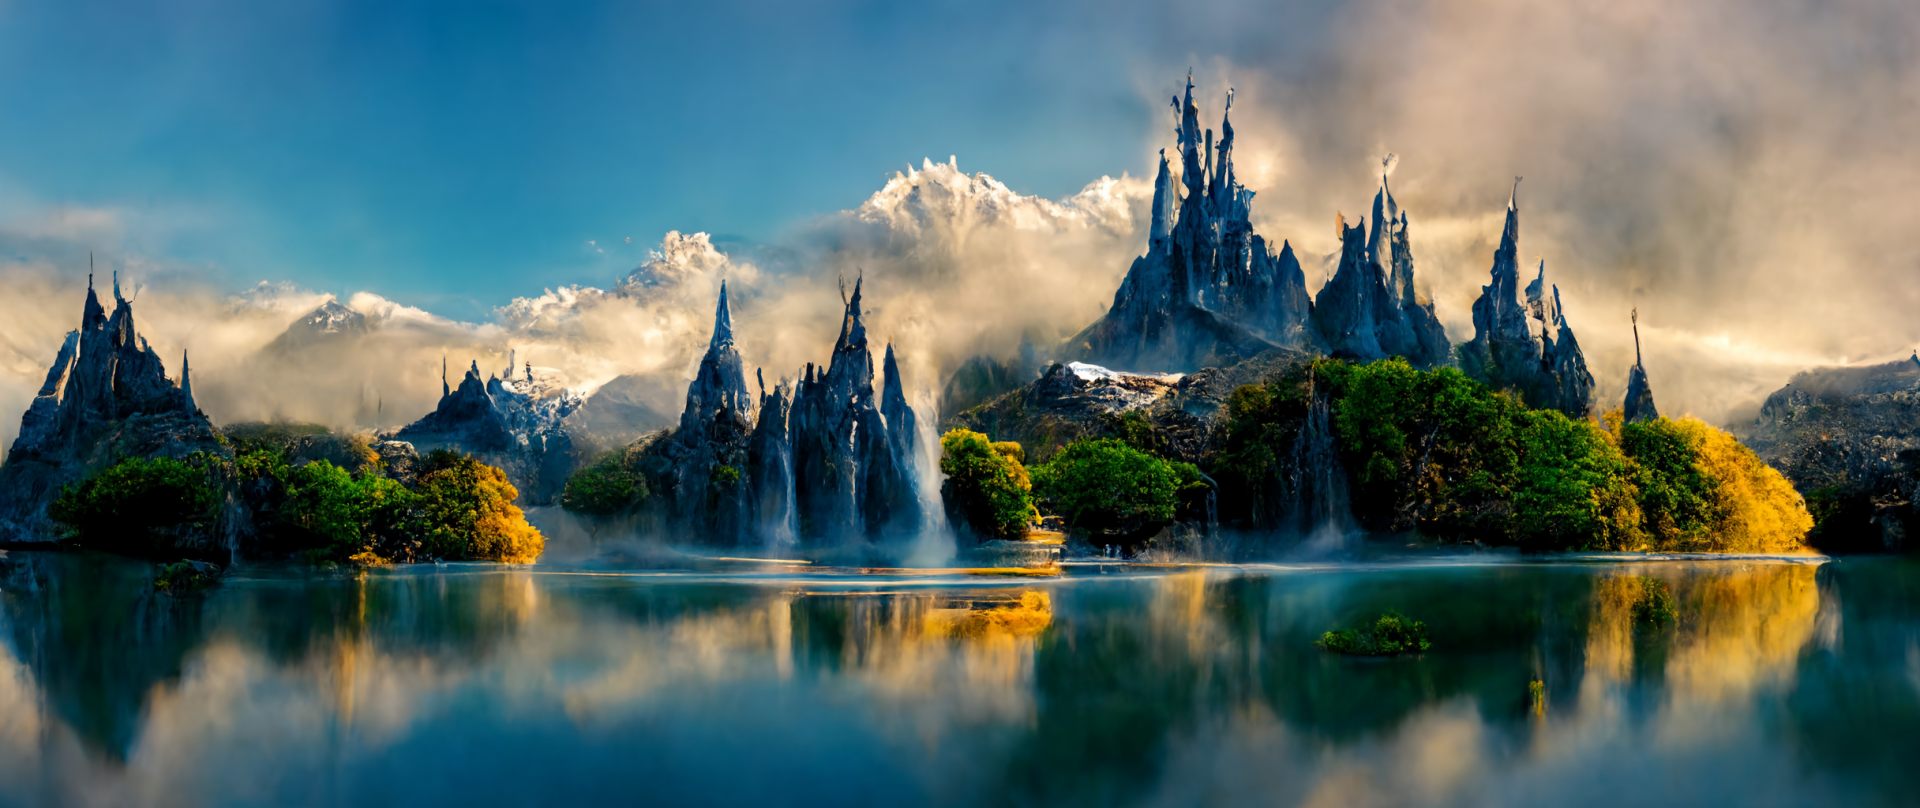 9d0610f5-998b-4e58-9a71-2f045e2fd3b2_S3RAPH_fantasy_kingdom._grean_trees_and_reflective_blue_lake._castle_towers._background_hills_and_waterfall.png